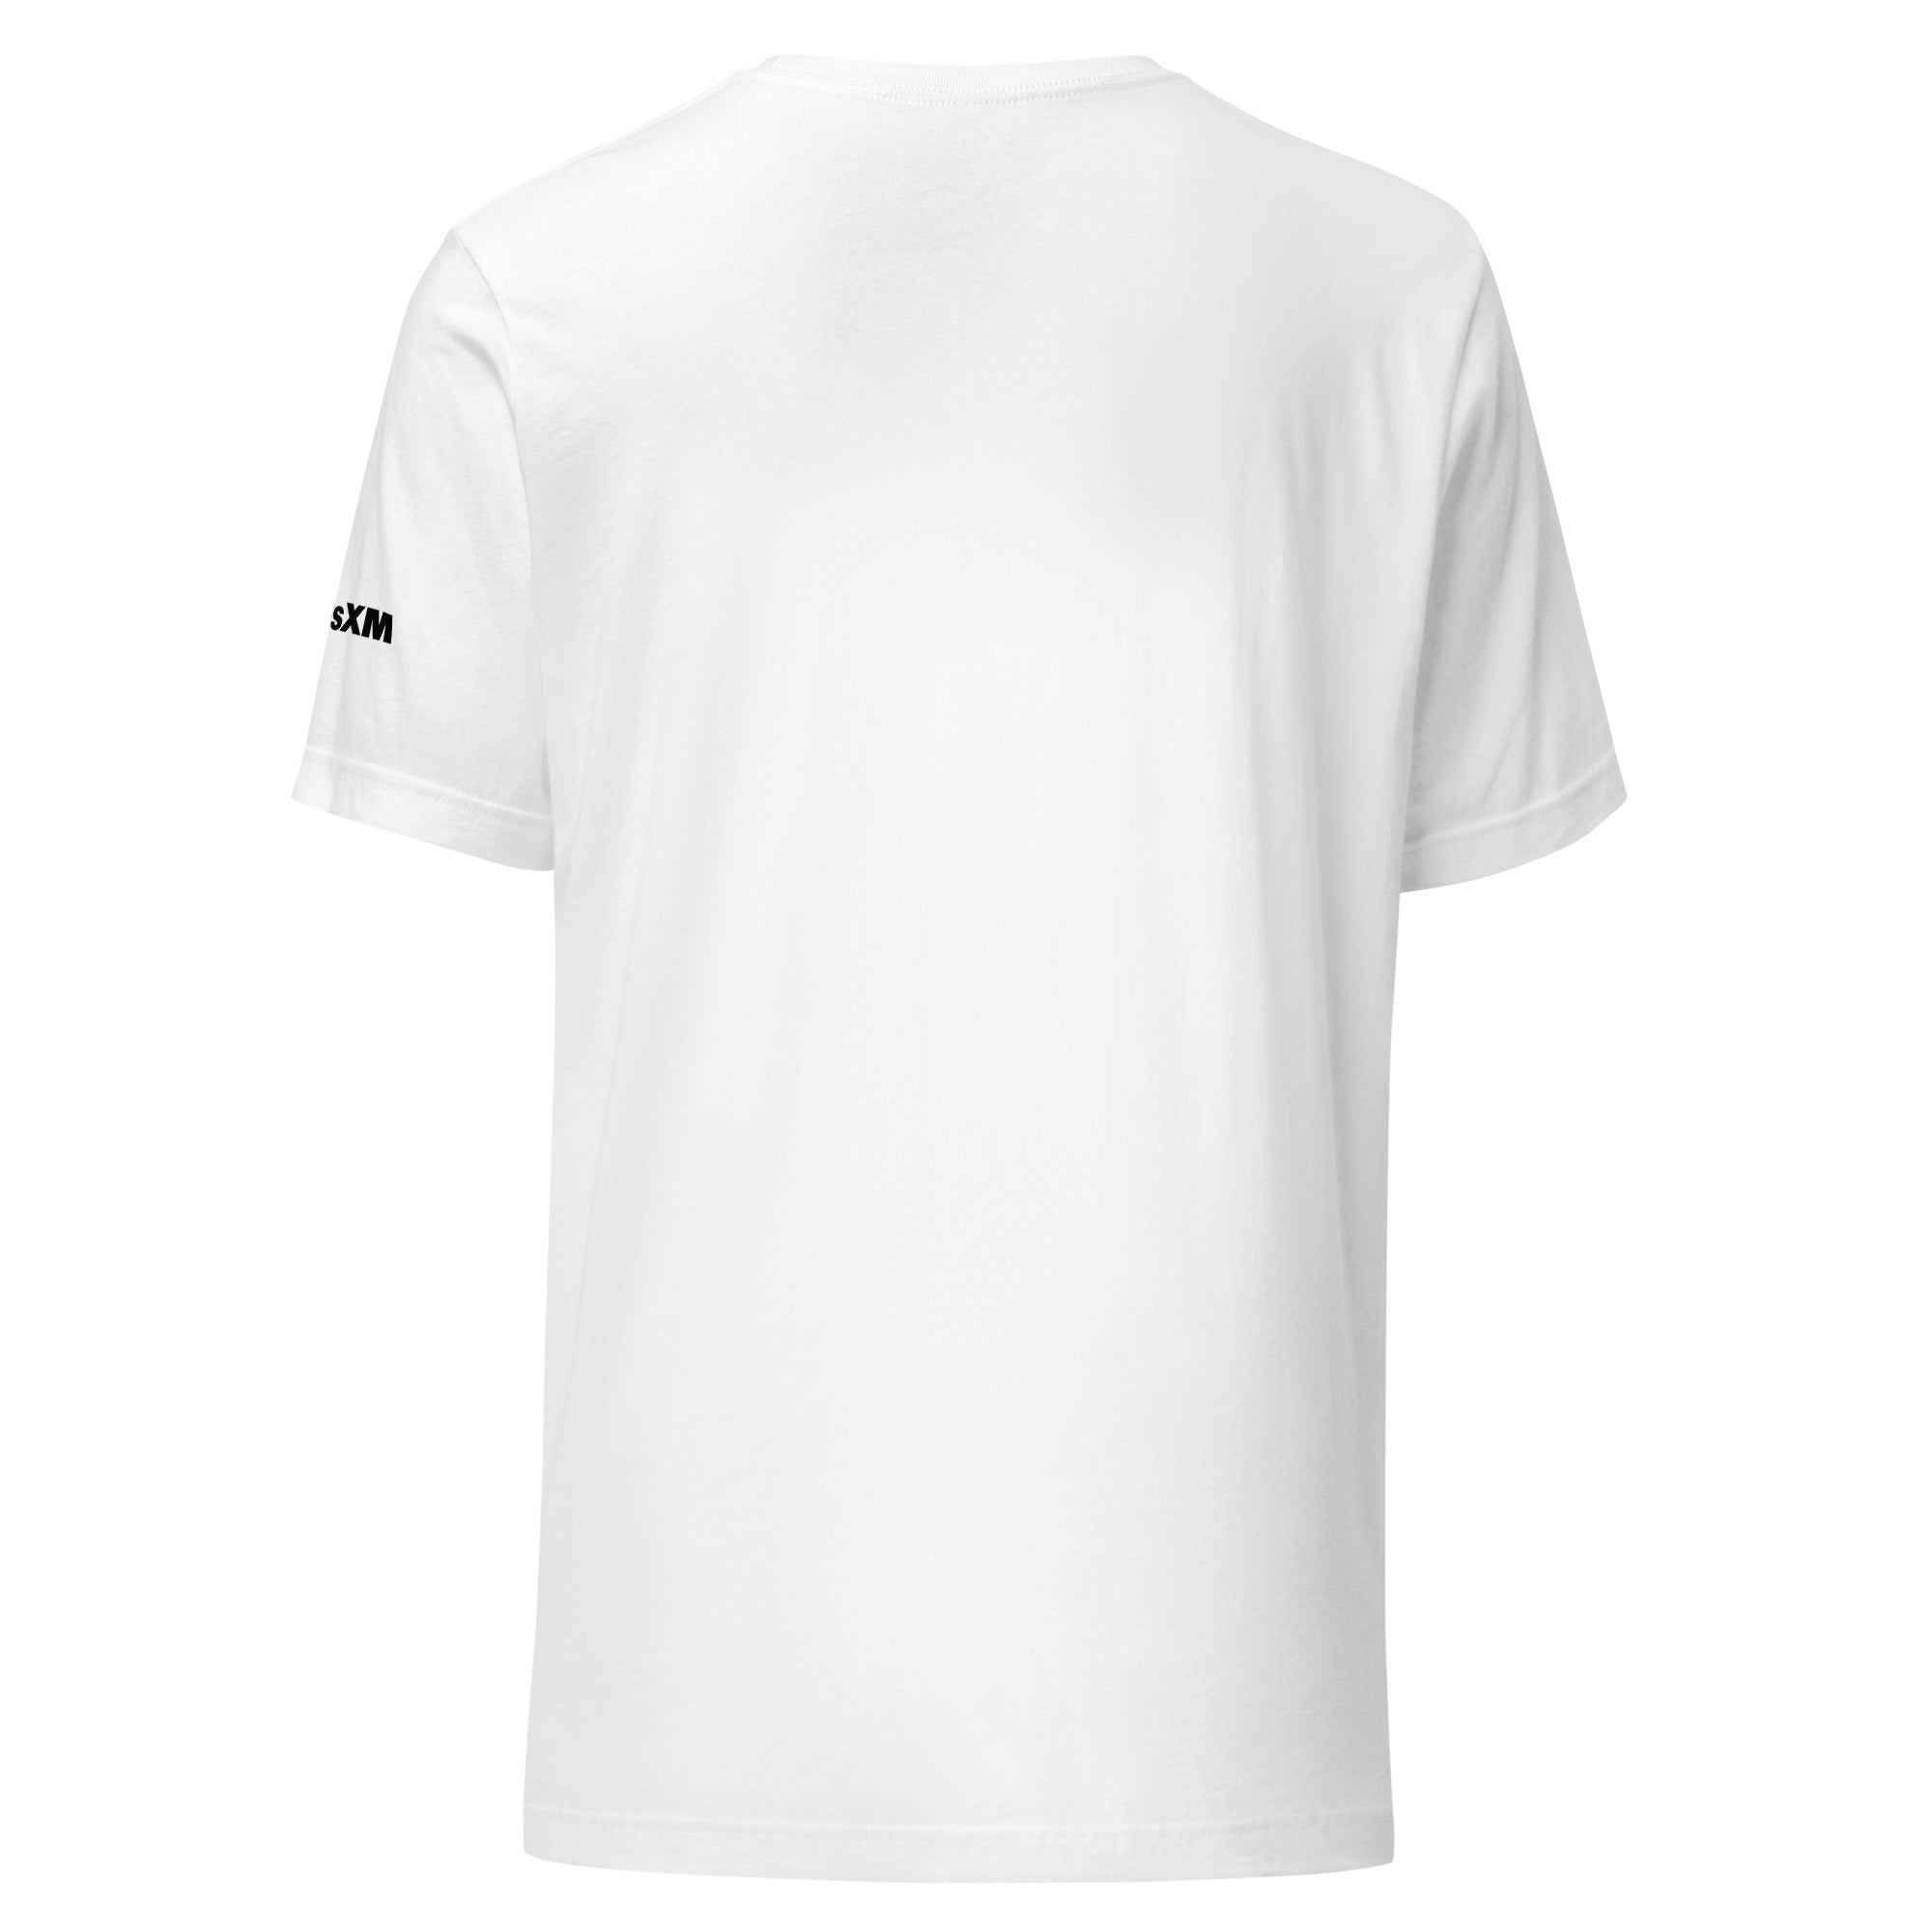 Prime Country: T-shirt (White)